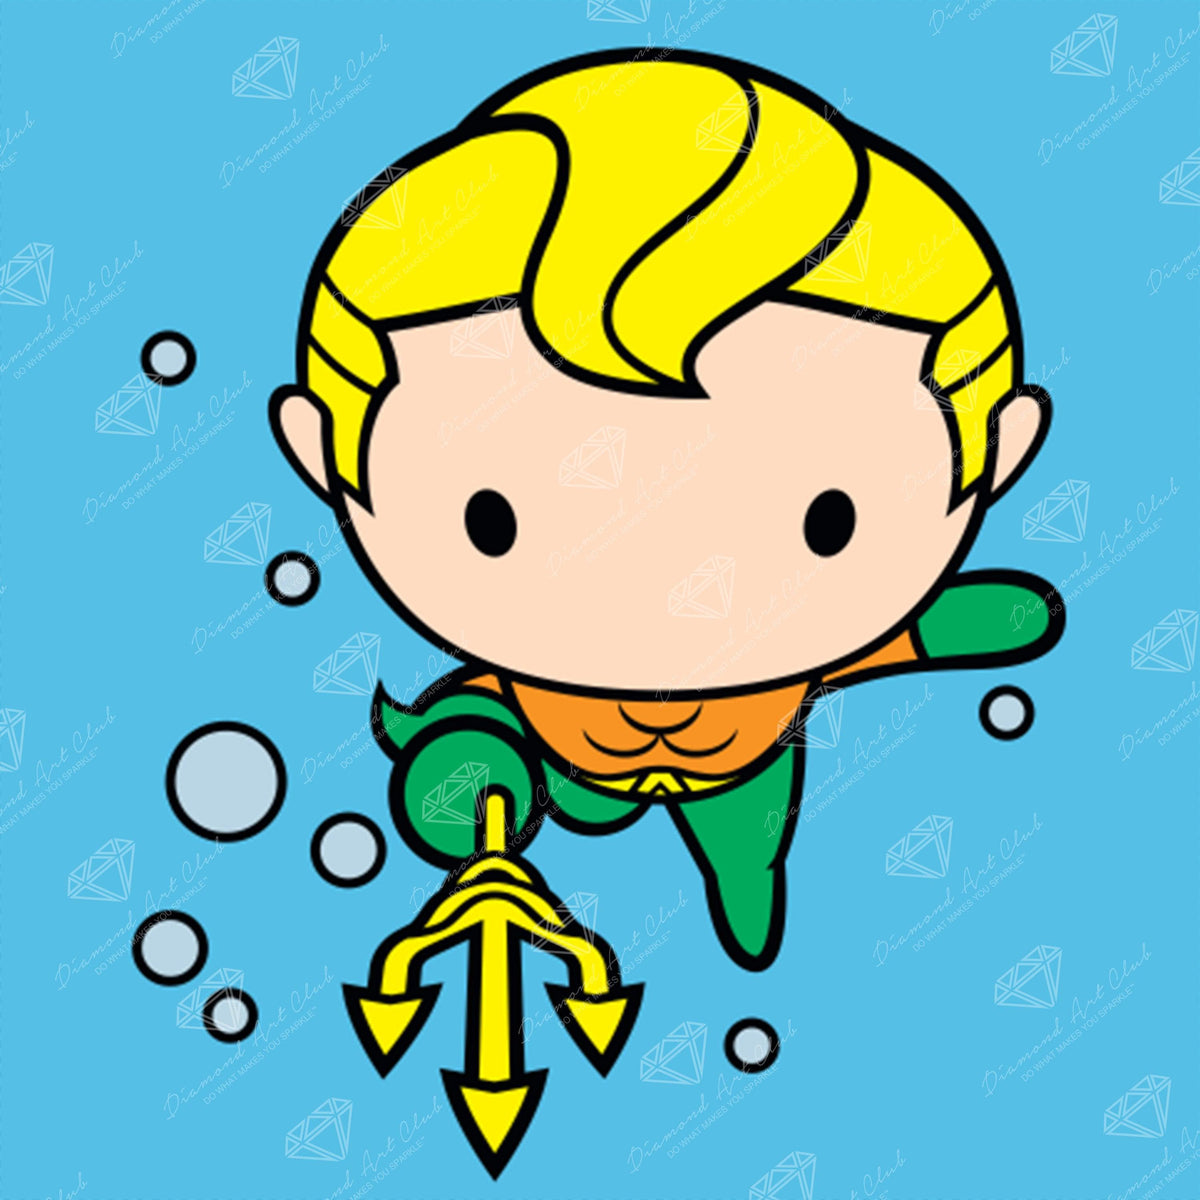 Diamond Painting Aquaman Chibi 9" x 9" (22.7cm x 22.7cm) / Round with 8 Colors including 2 ABs / 6,561